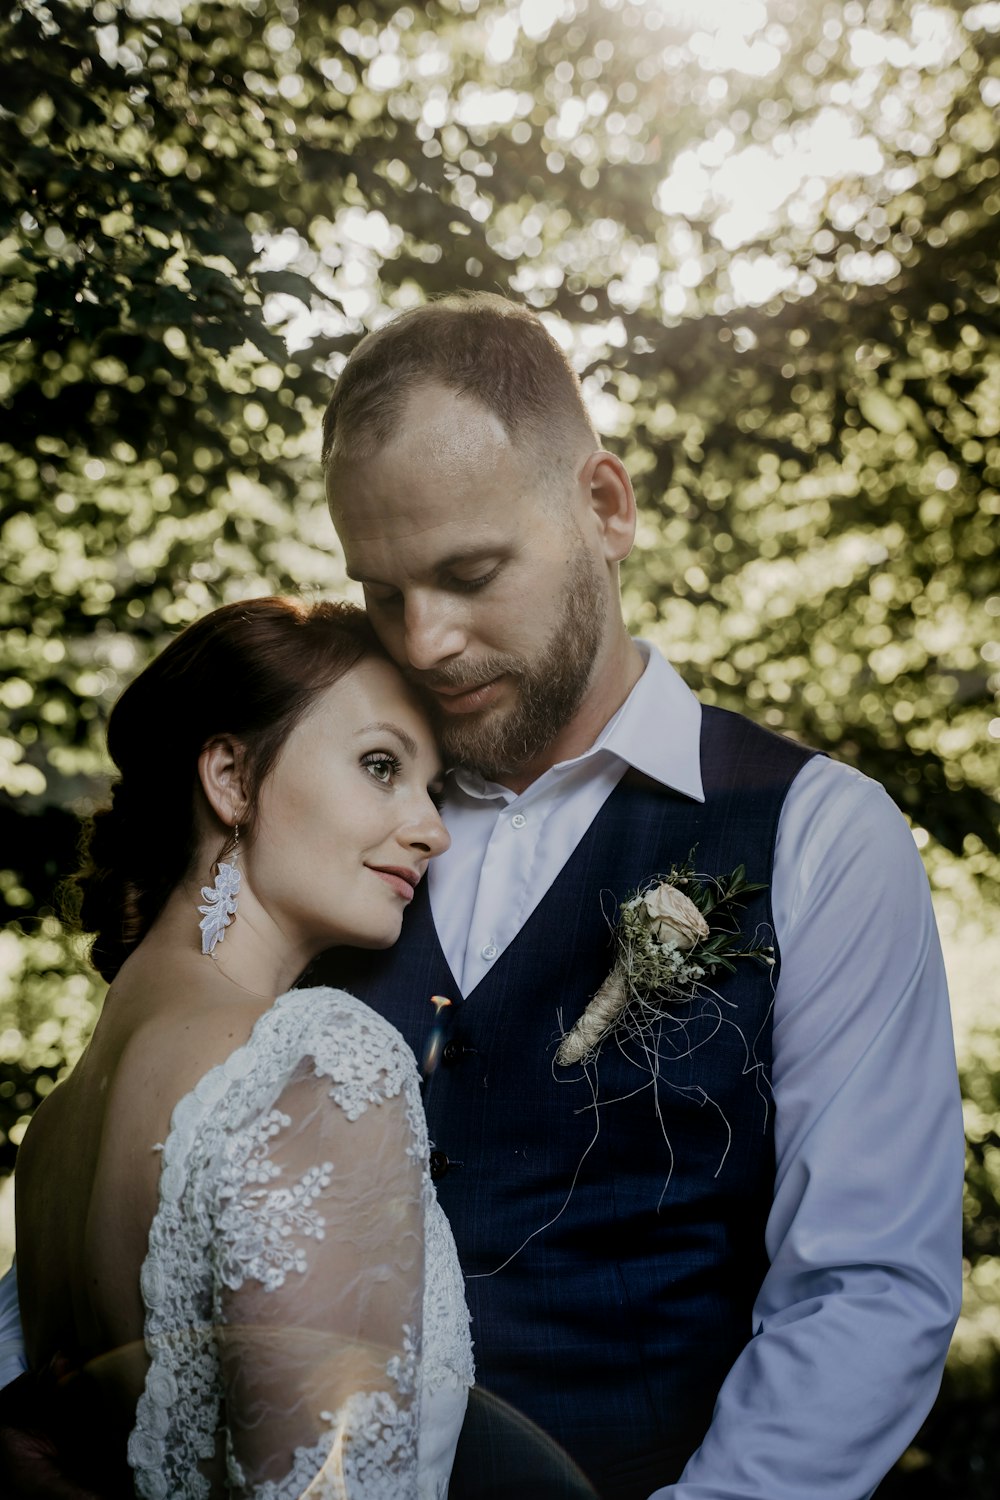 man in blue suit jacket kissing woman in white floral lace wedding dress